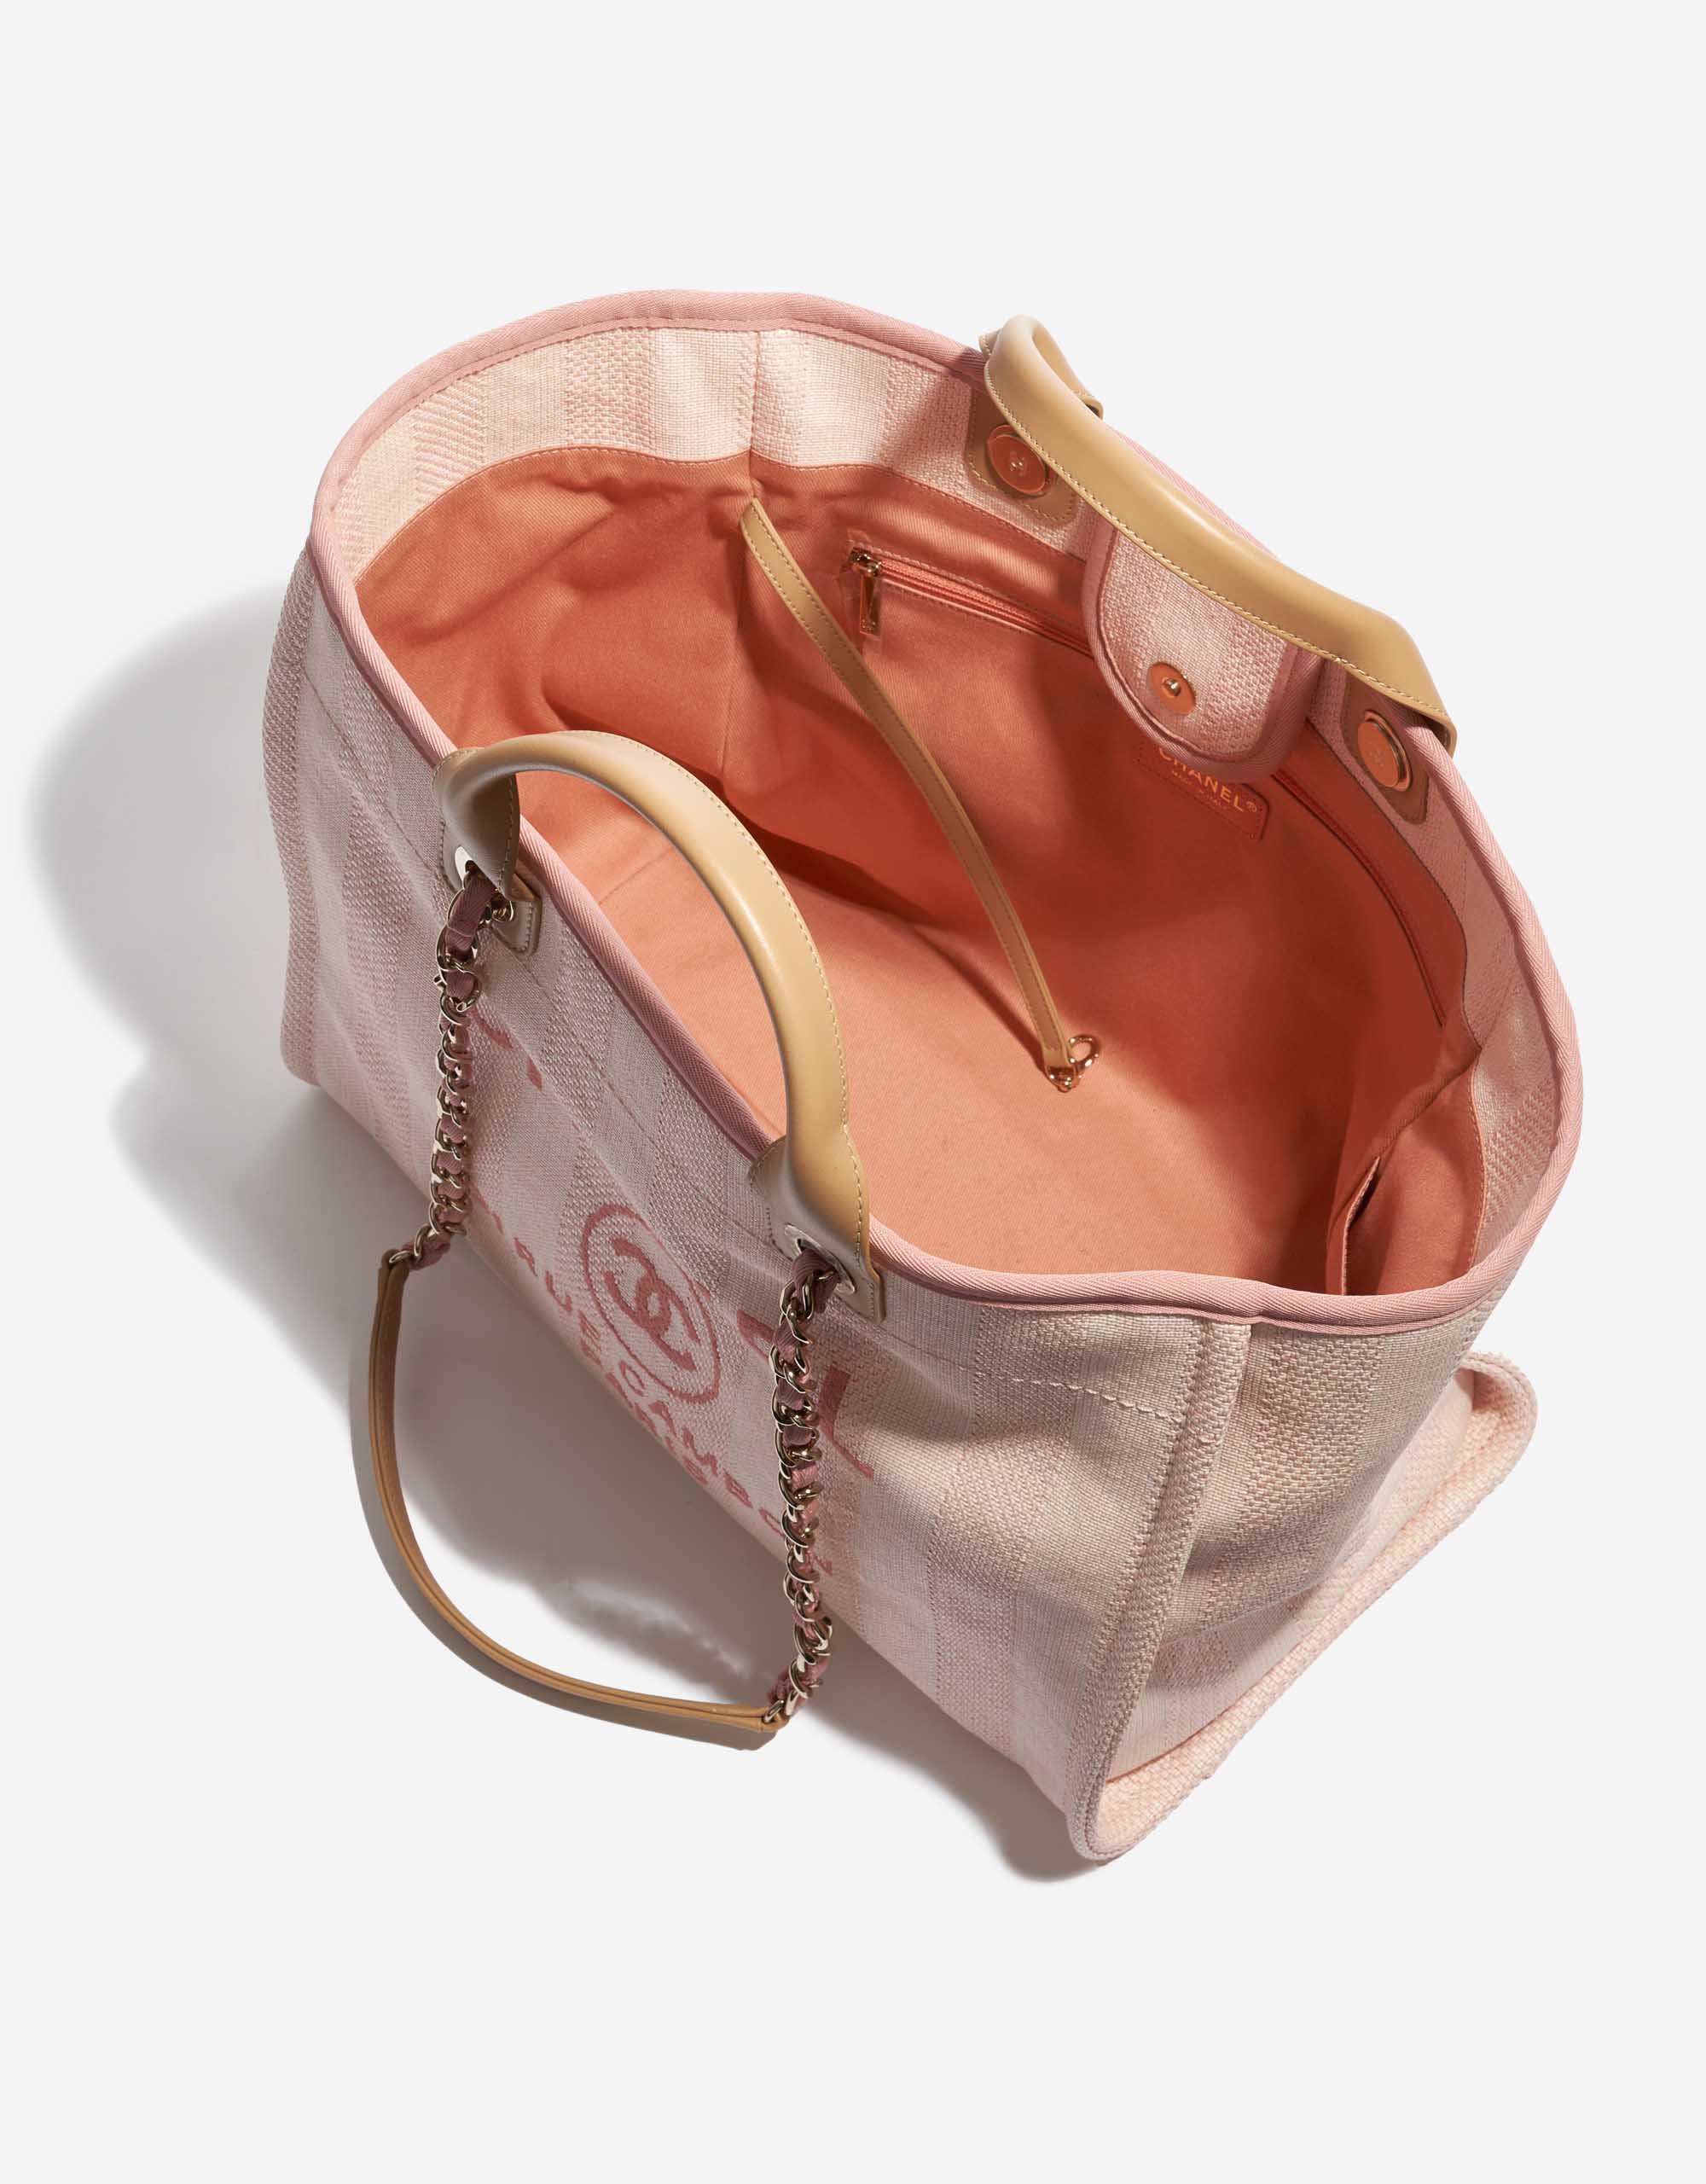 Pre-owned Chanel bag Deauville Medium Canvas Pink Pink, Rose Front Open | Sell your designer bag on Saclab.com